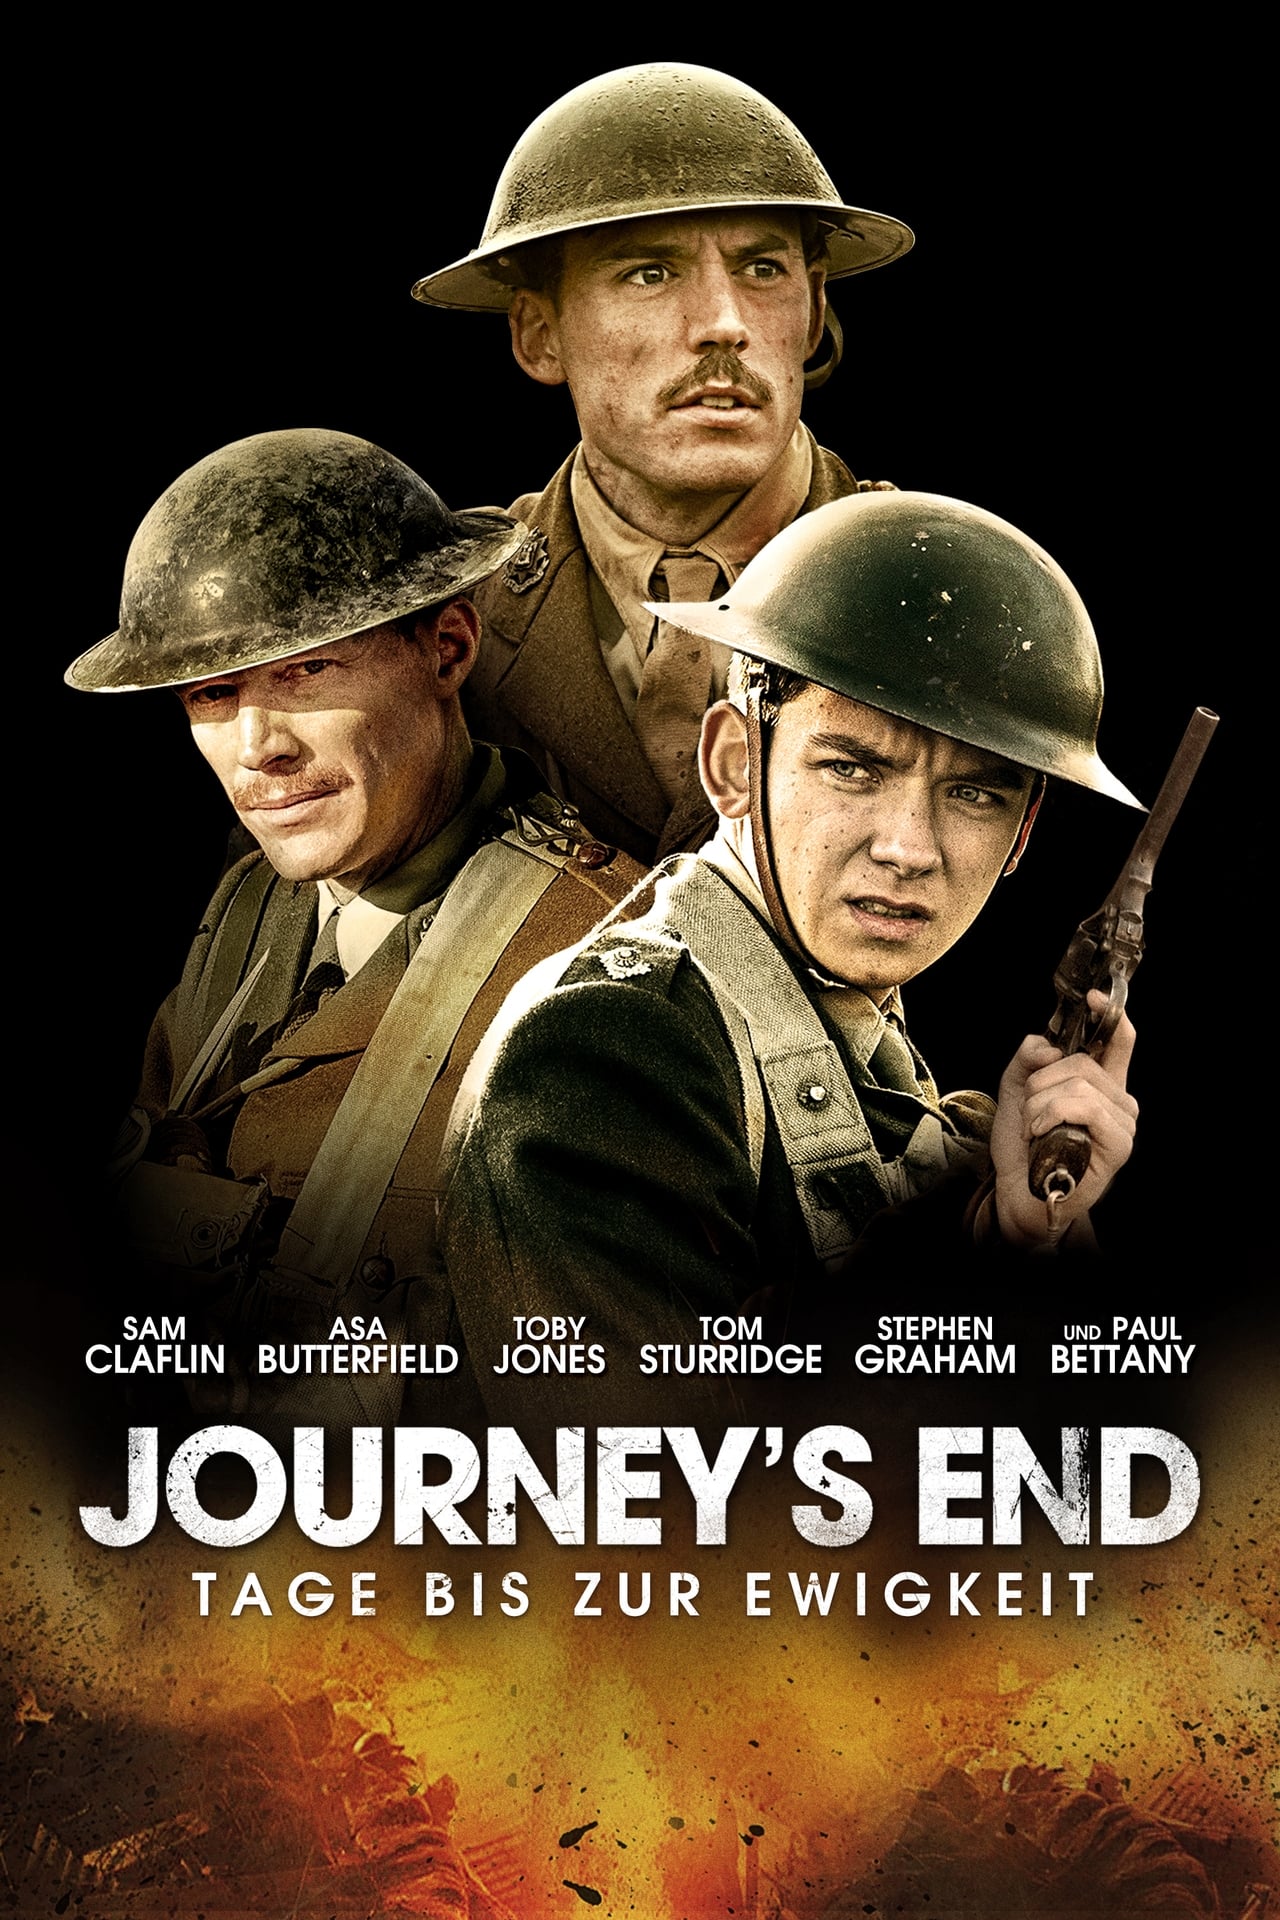 journey's end text